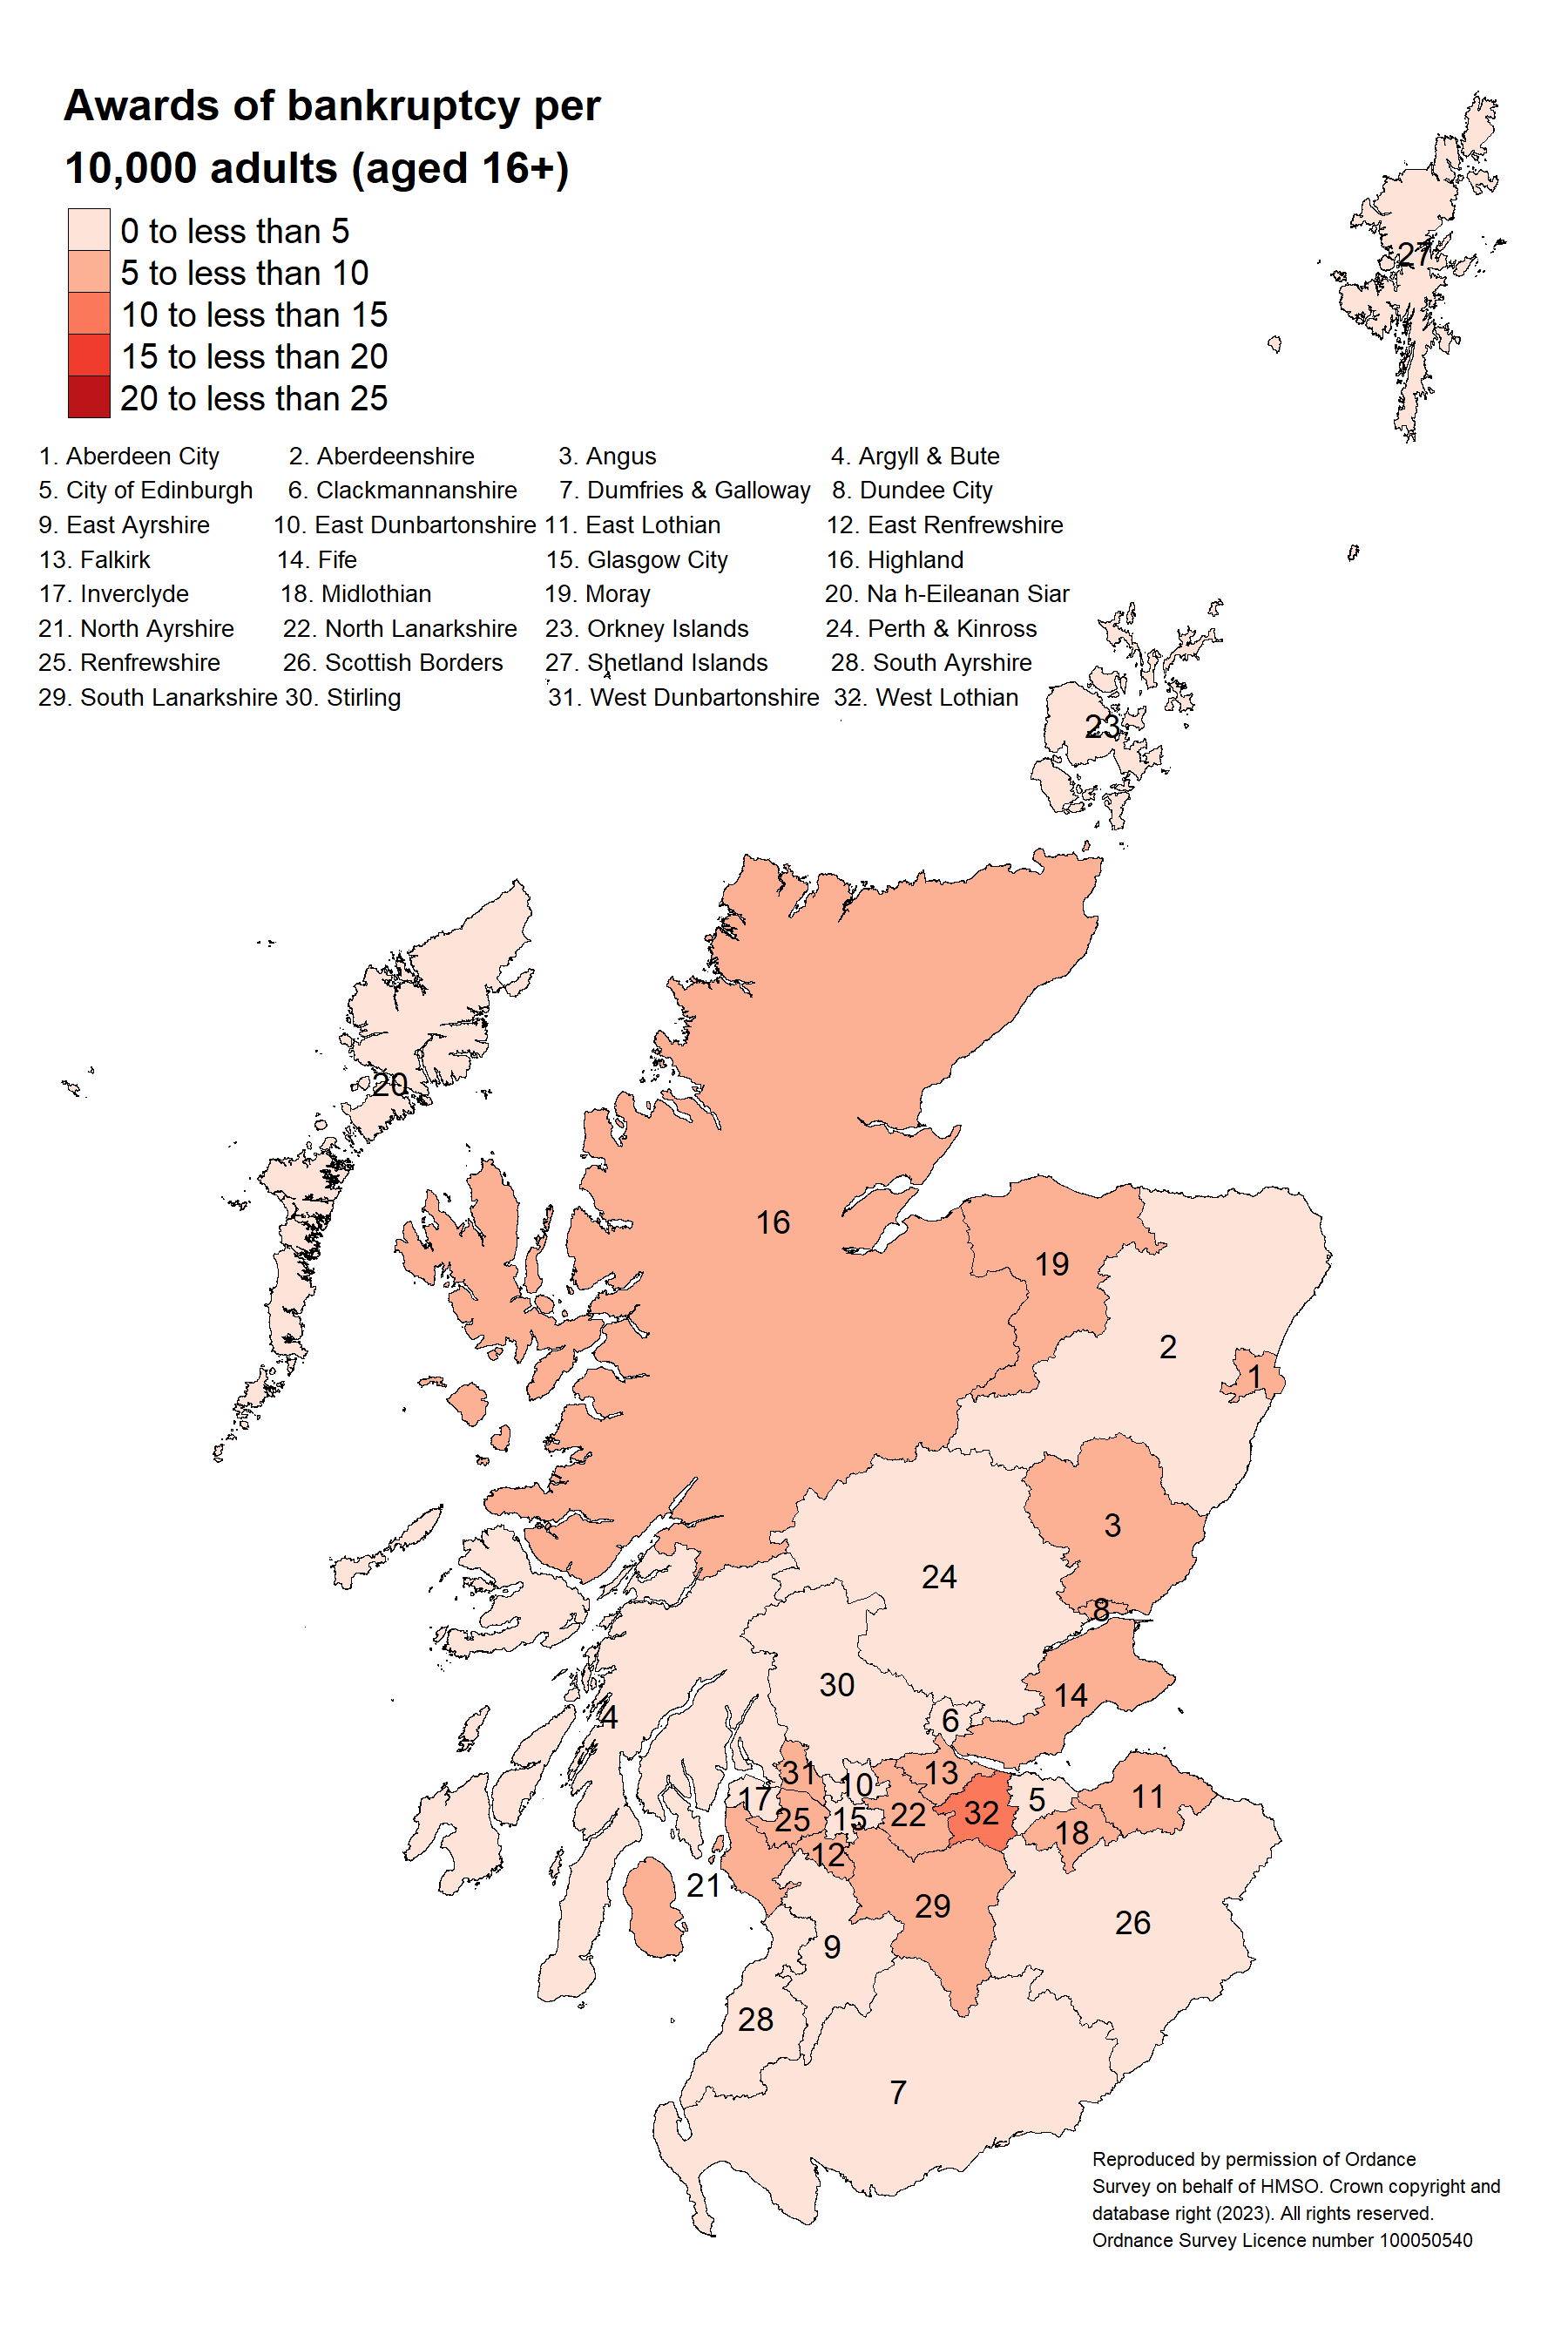 Heat Map 1 shows the awards of bankruptcy rates in each local authority in 2022-23 by grouping intervals of 5. This heat map shows that West Lothian is in one of the highest groupings.